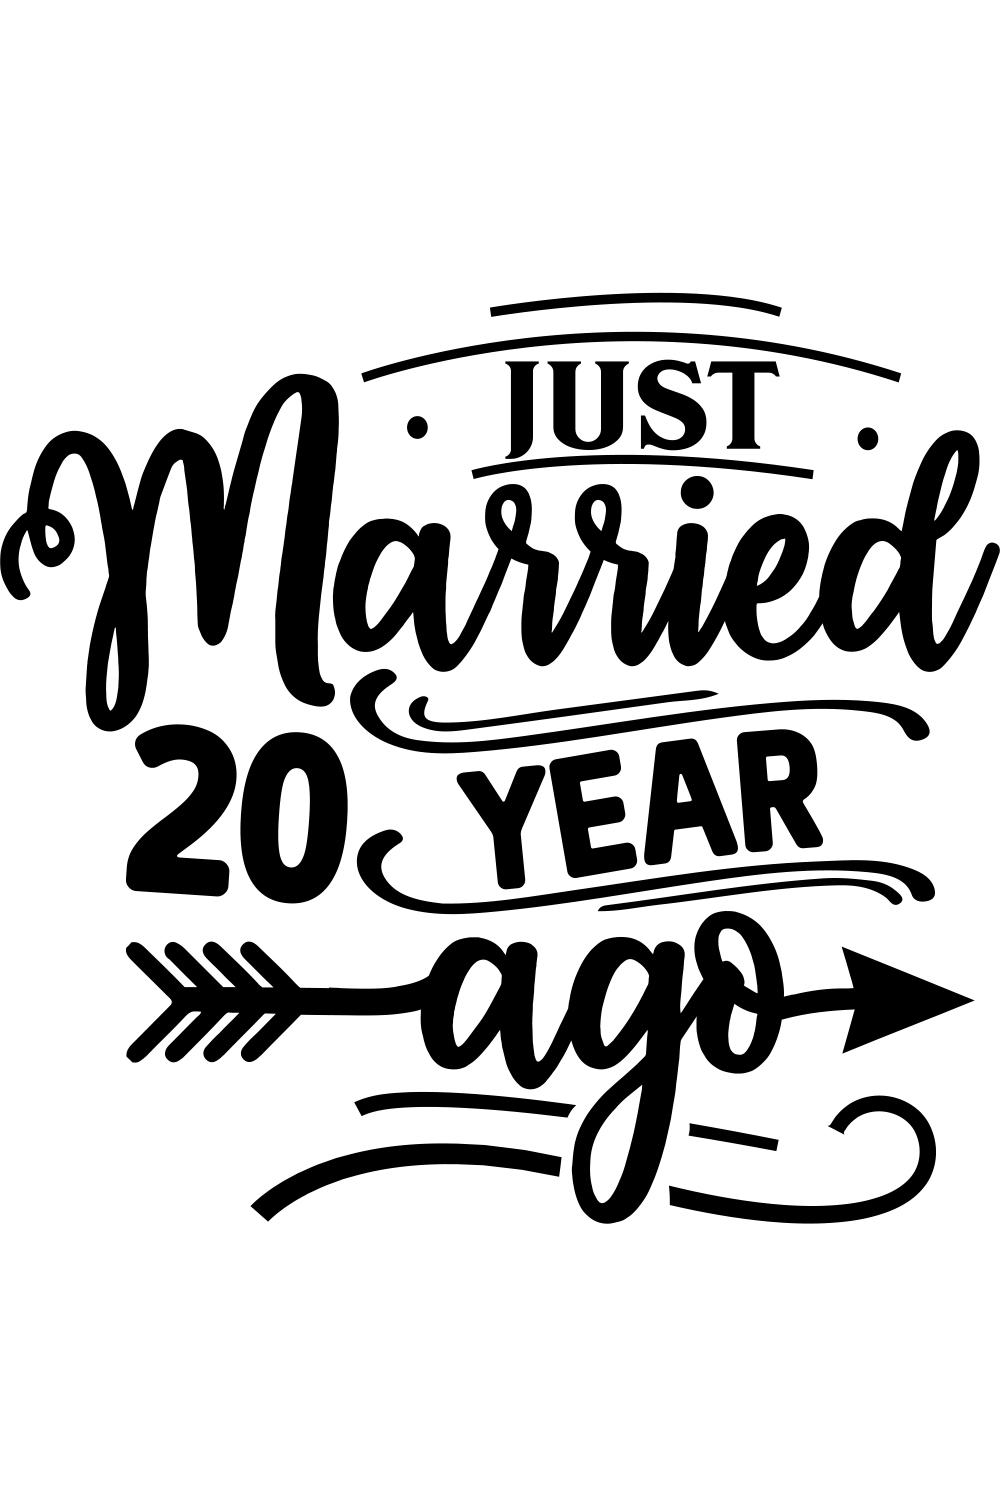 Just Married 20 Years Ago svg pinterest preview image.